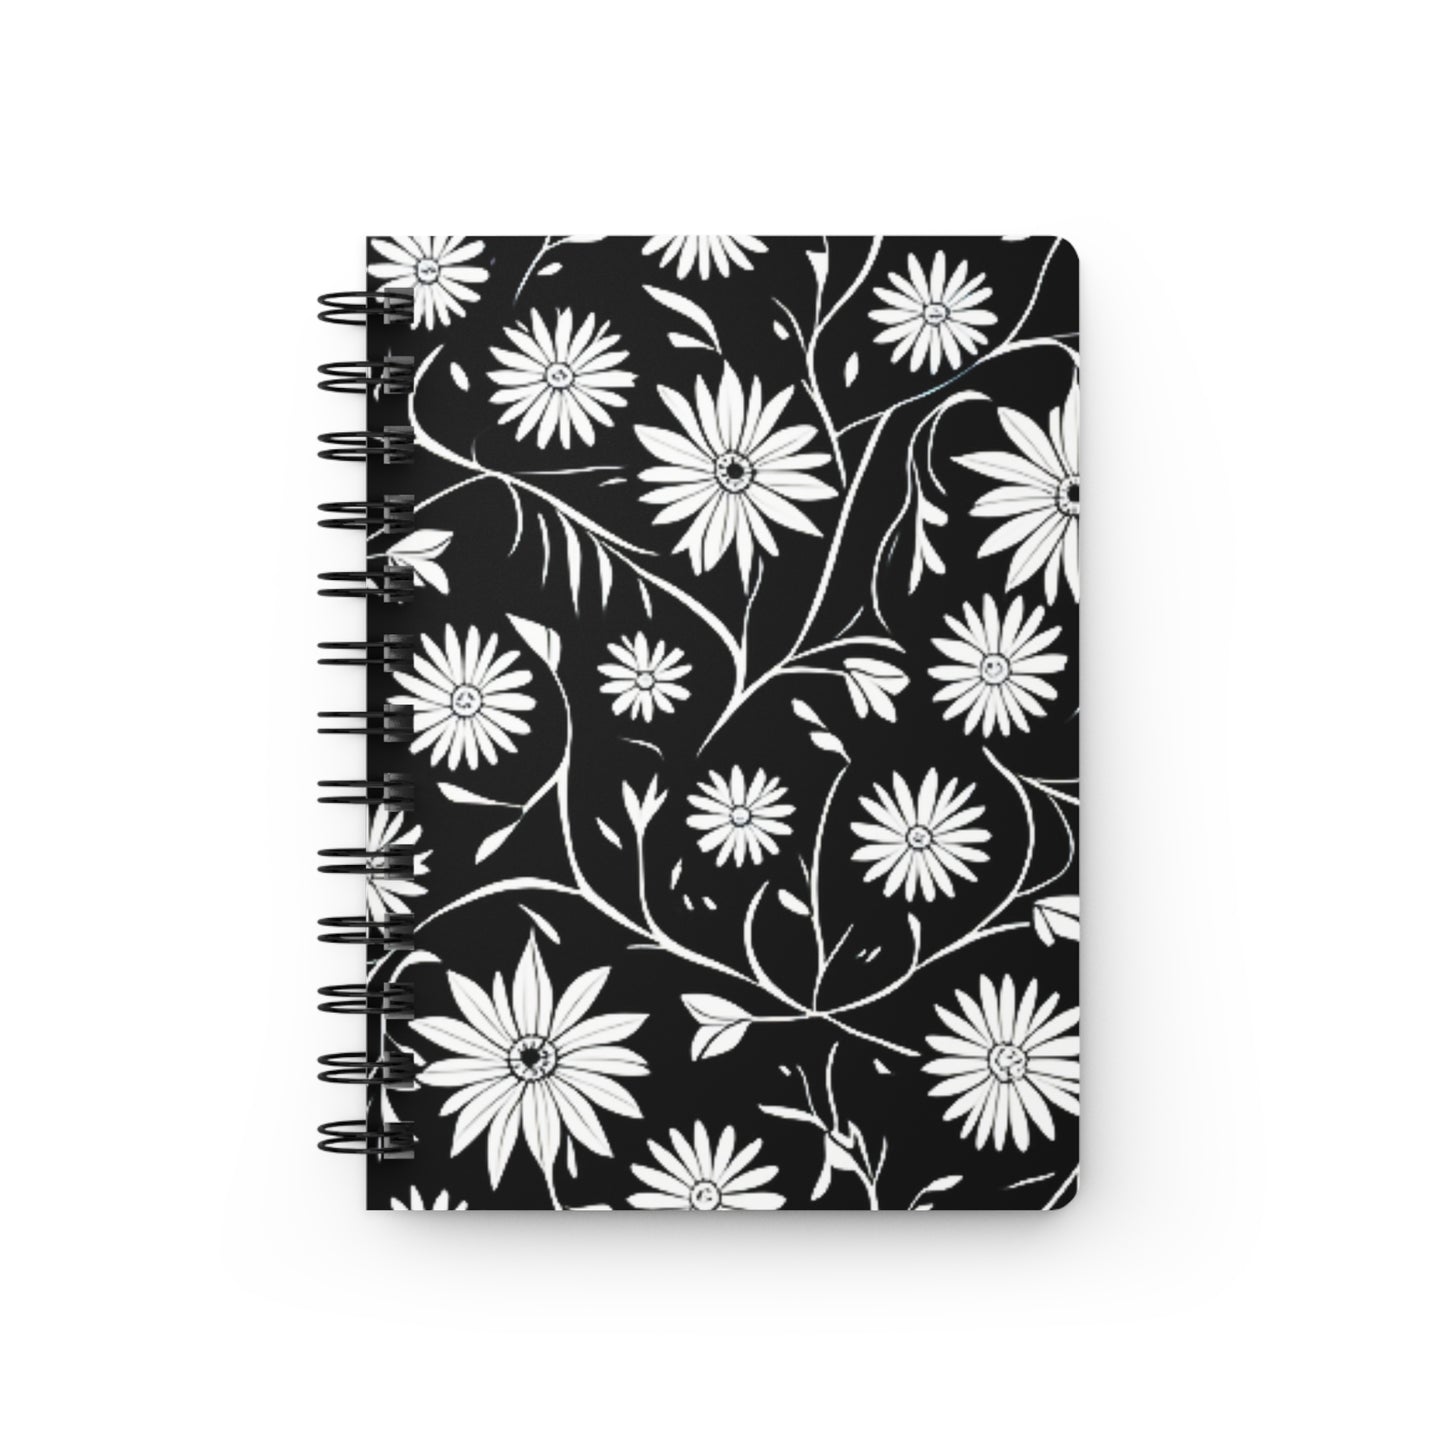 Field of Scandinavian Black and White Daisies 1970s Floral Pattern Writing Sketch Inspiration Spiral Bound Journal